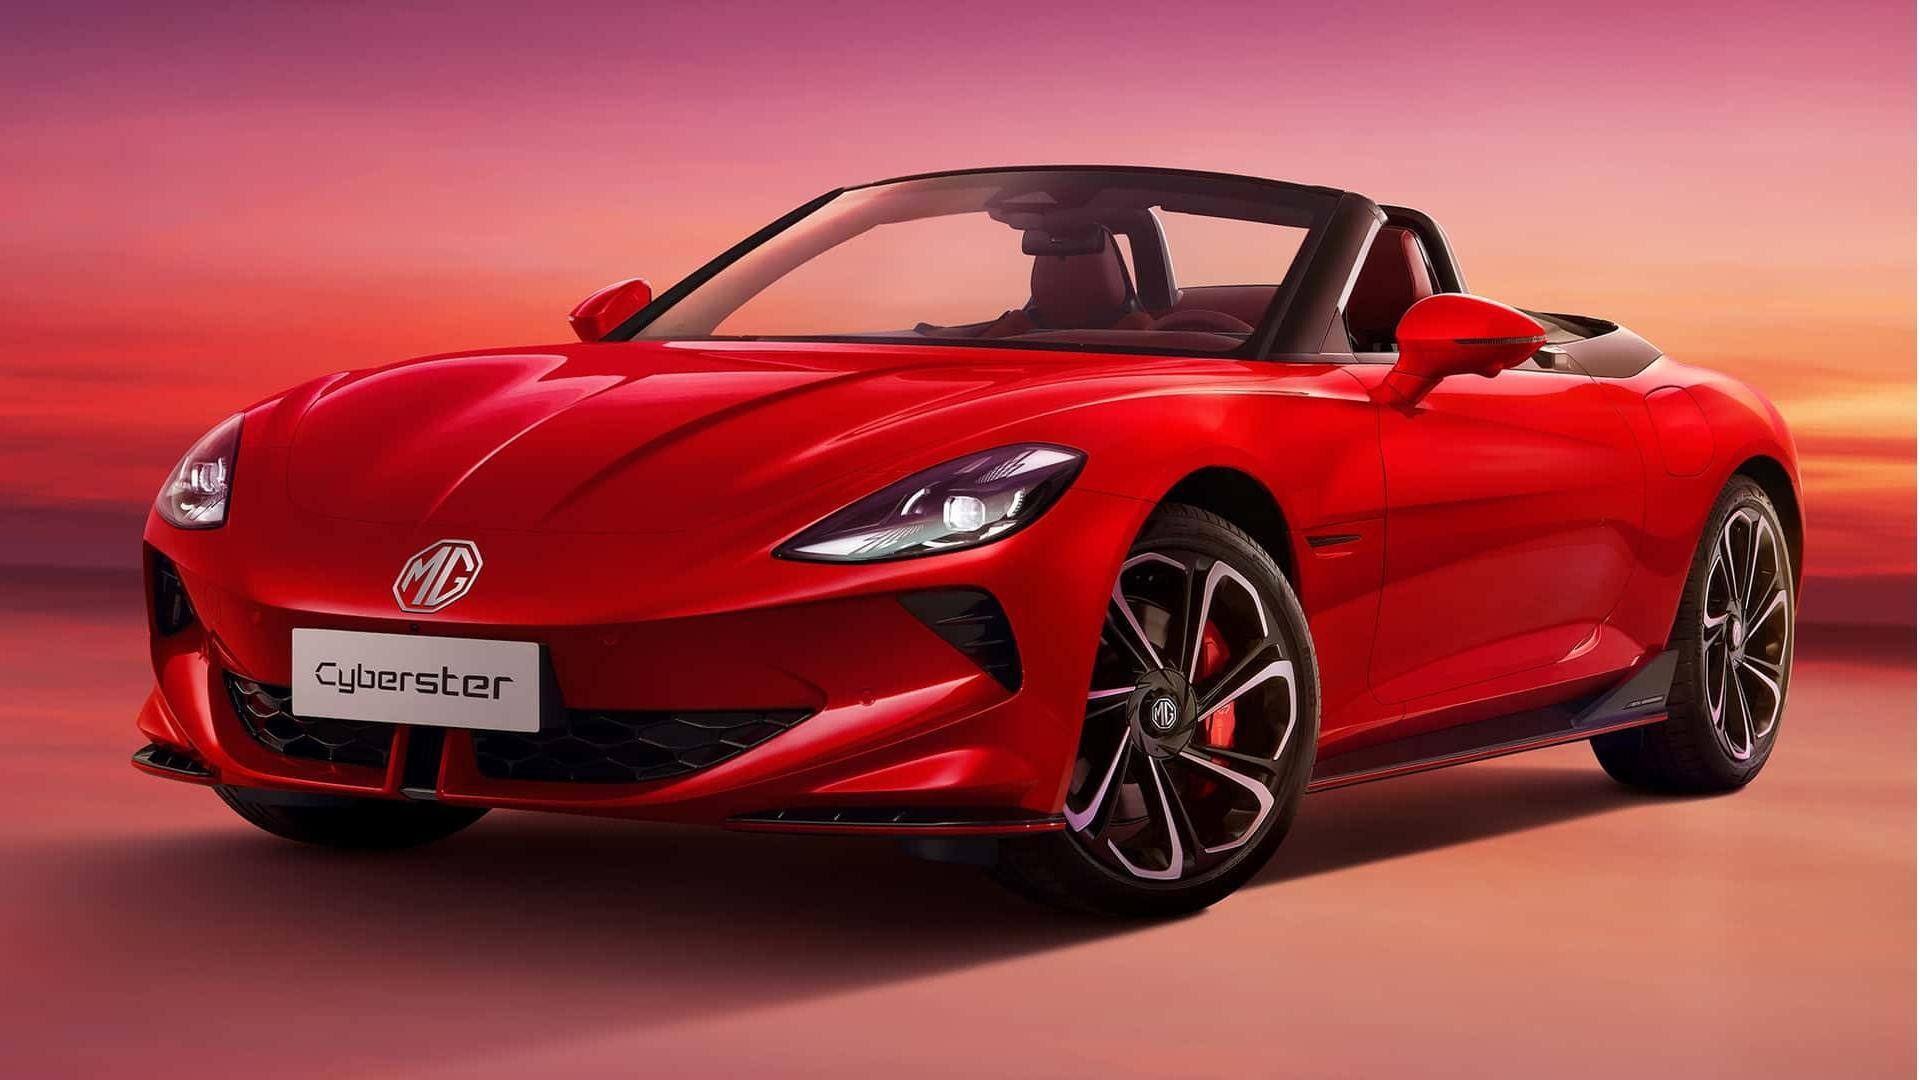 MG Motor reveals technical specifications of its Cyberster roadster